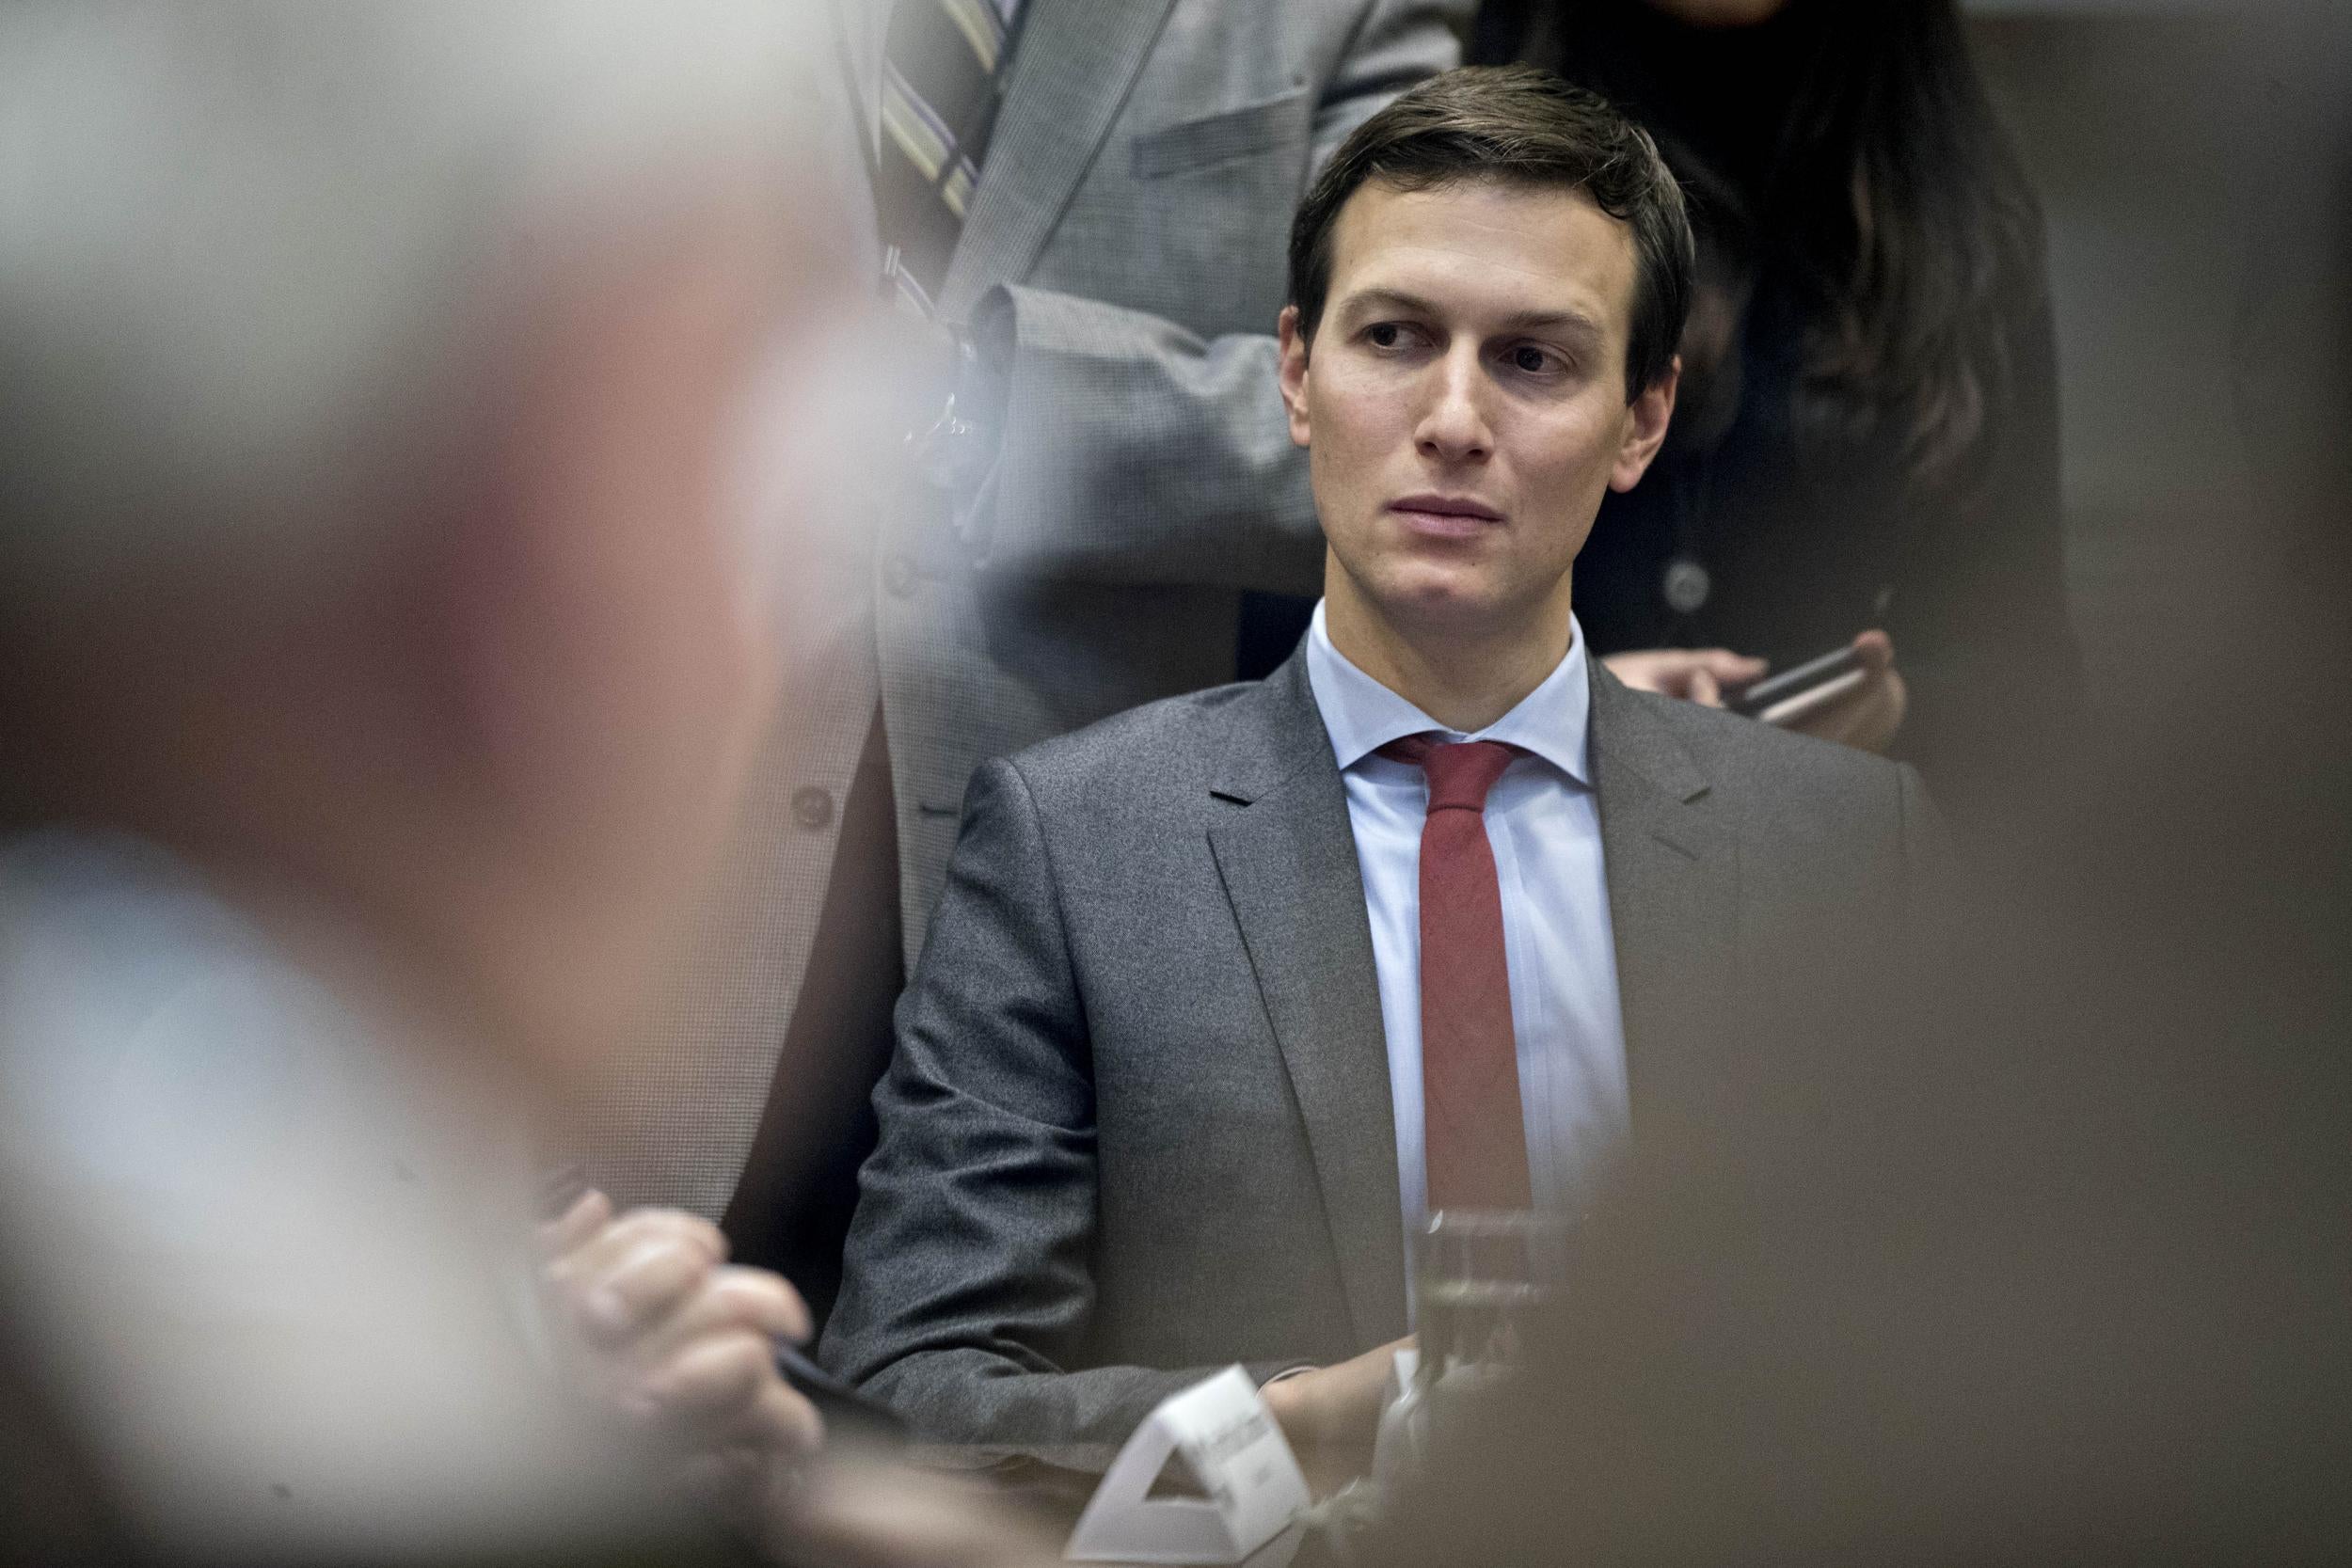 Jared Kushner reportedly failed to disclose meetings with Russian officials in his security clearance form.